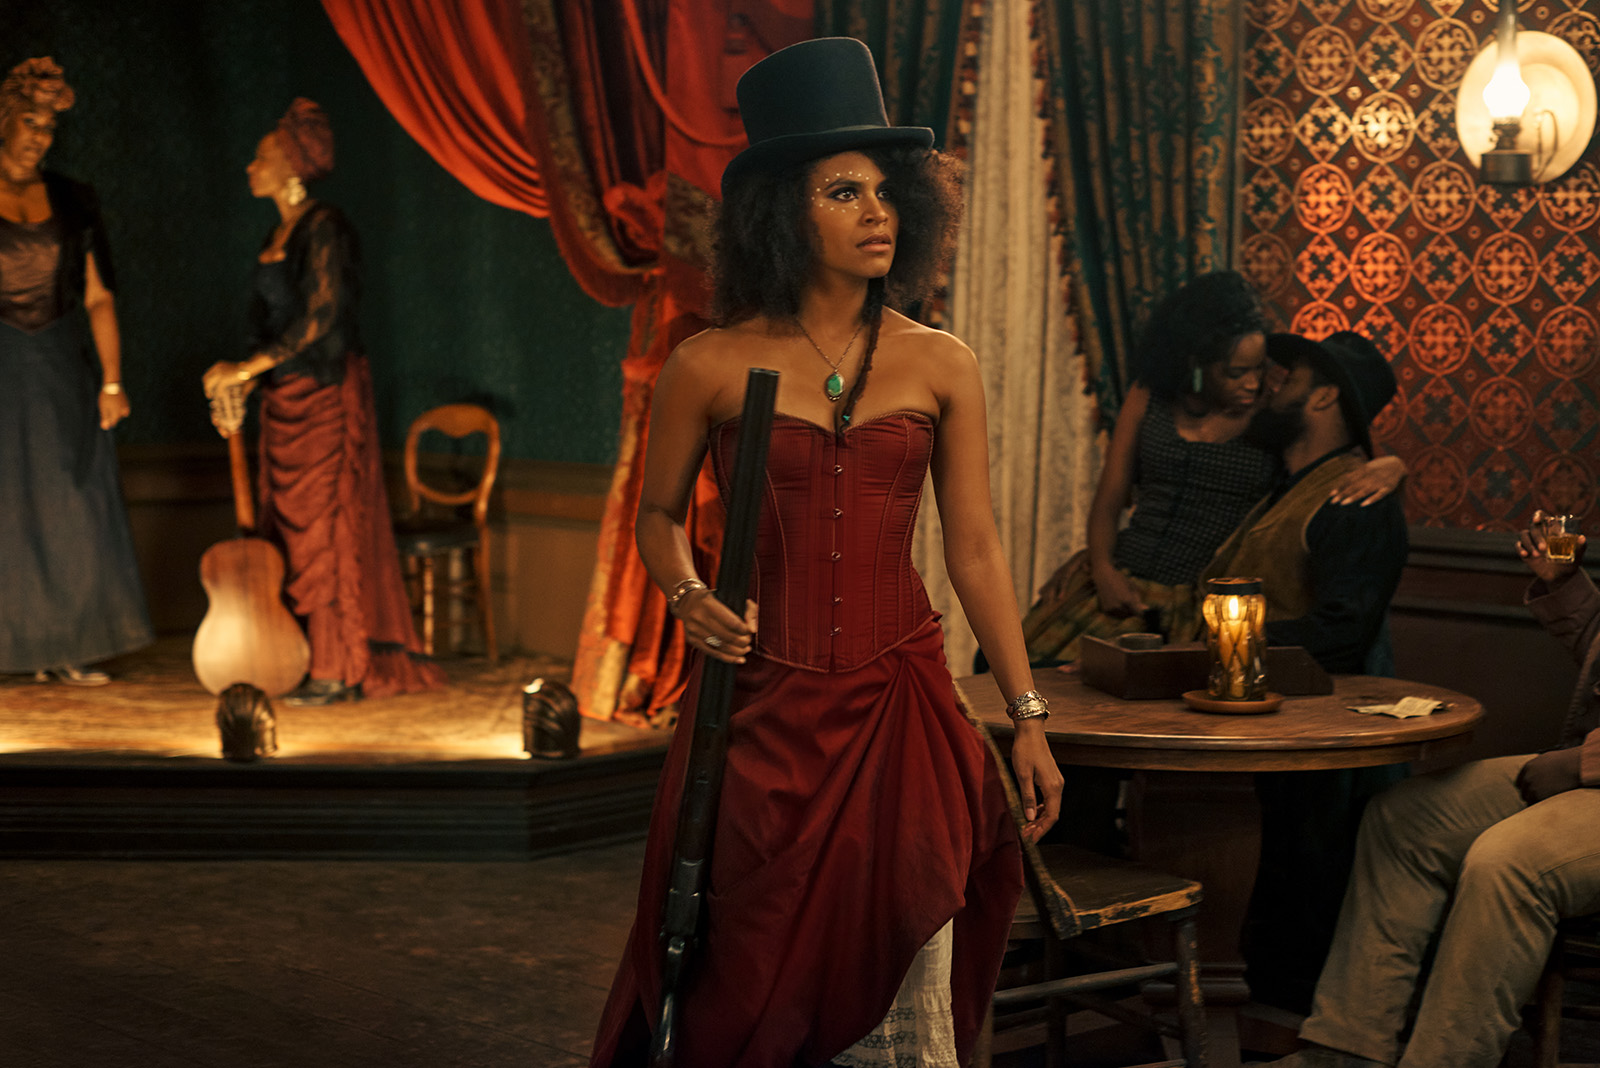 Zazie Beetz as Stagecoach Mary in The Harder They Fall. Image © Netflix